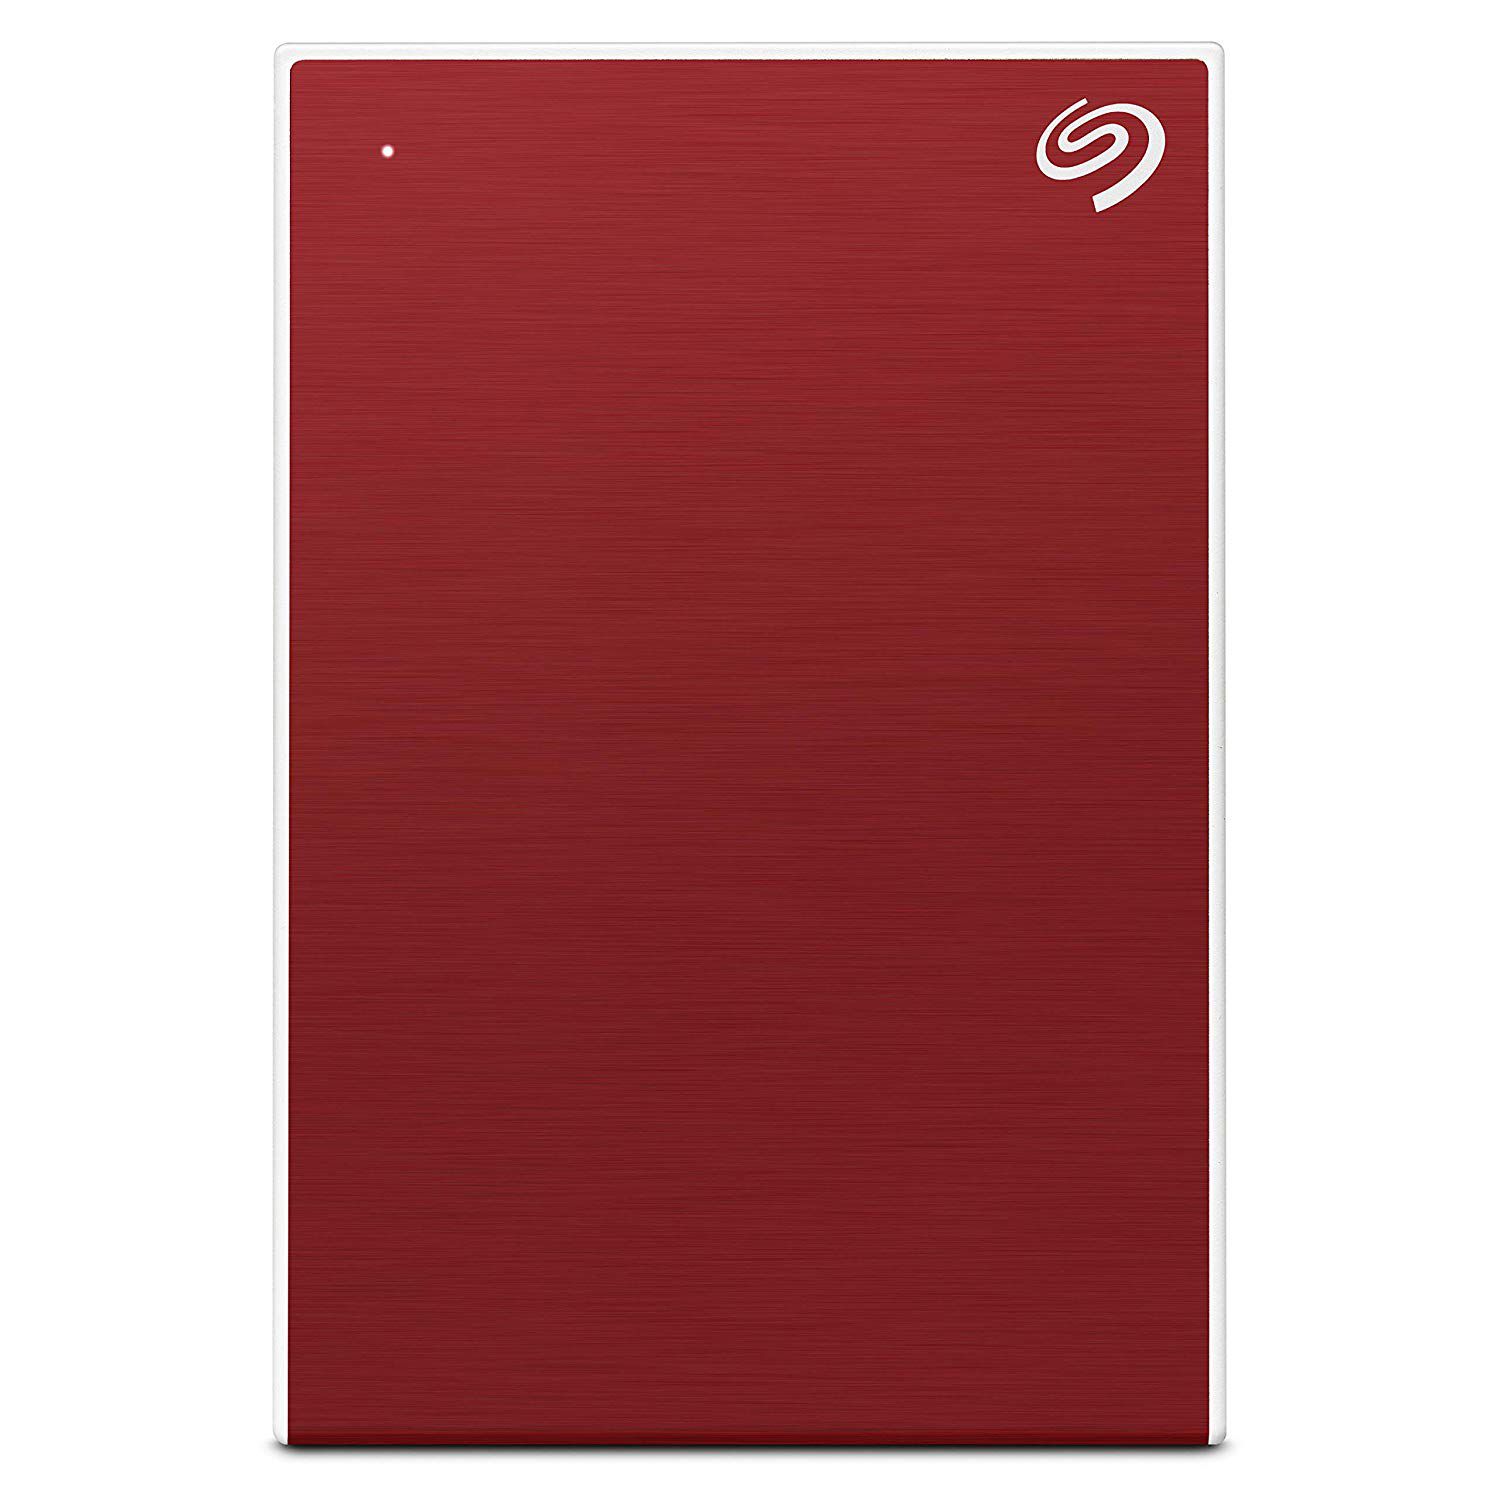     			Seagate Backup Plus Slim 5TB External Hard Drive Portable HDD-Red USB 3.0 for PC Laptop and Mac, 1 year Mylio Create, 4 Months Adobe CC Photography, and 3-year Rescue Services (STHN5000403)